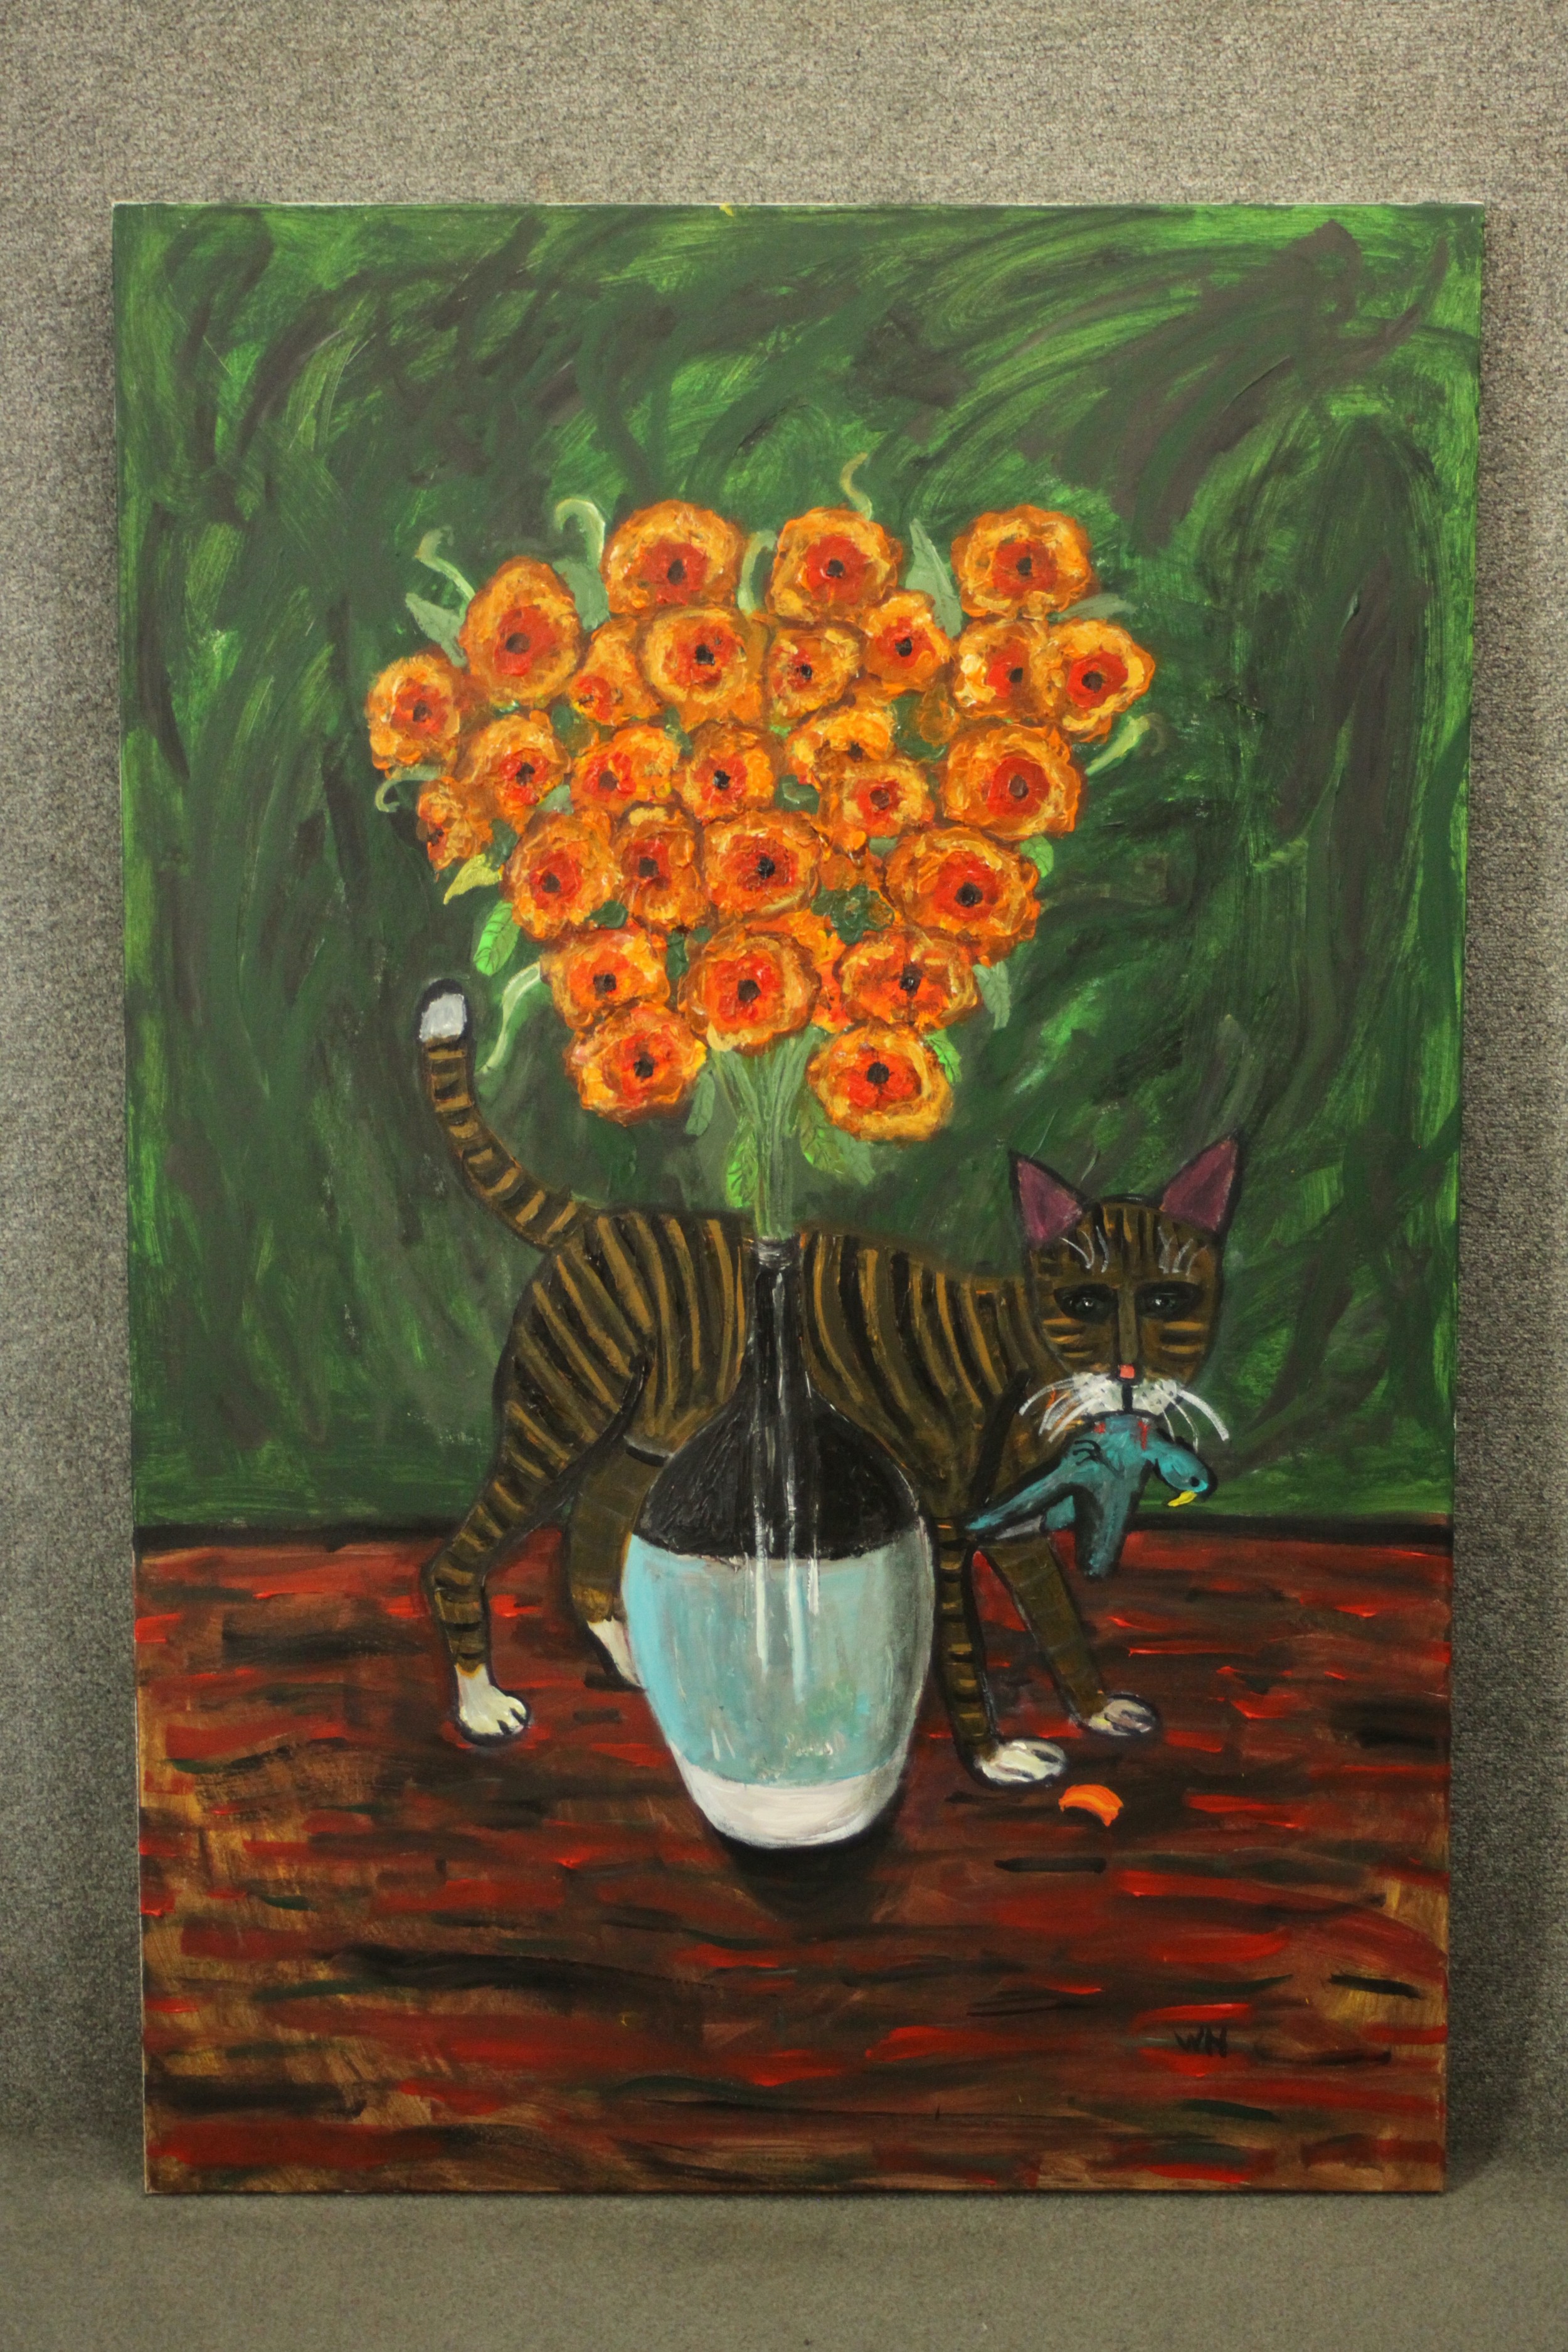 Wolf Howard, acrylic on canvas, still life of a cat with a bird in its mouth in front of a vase of